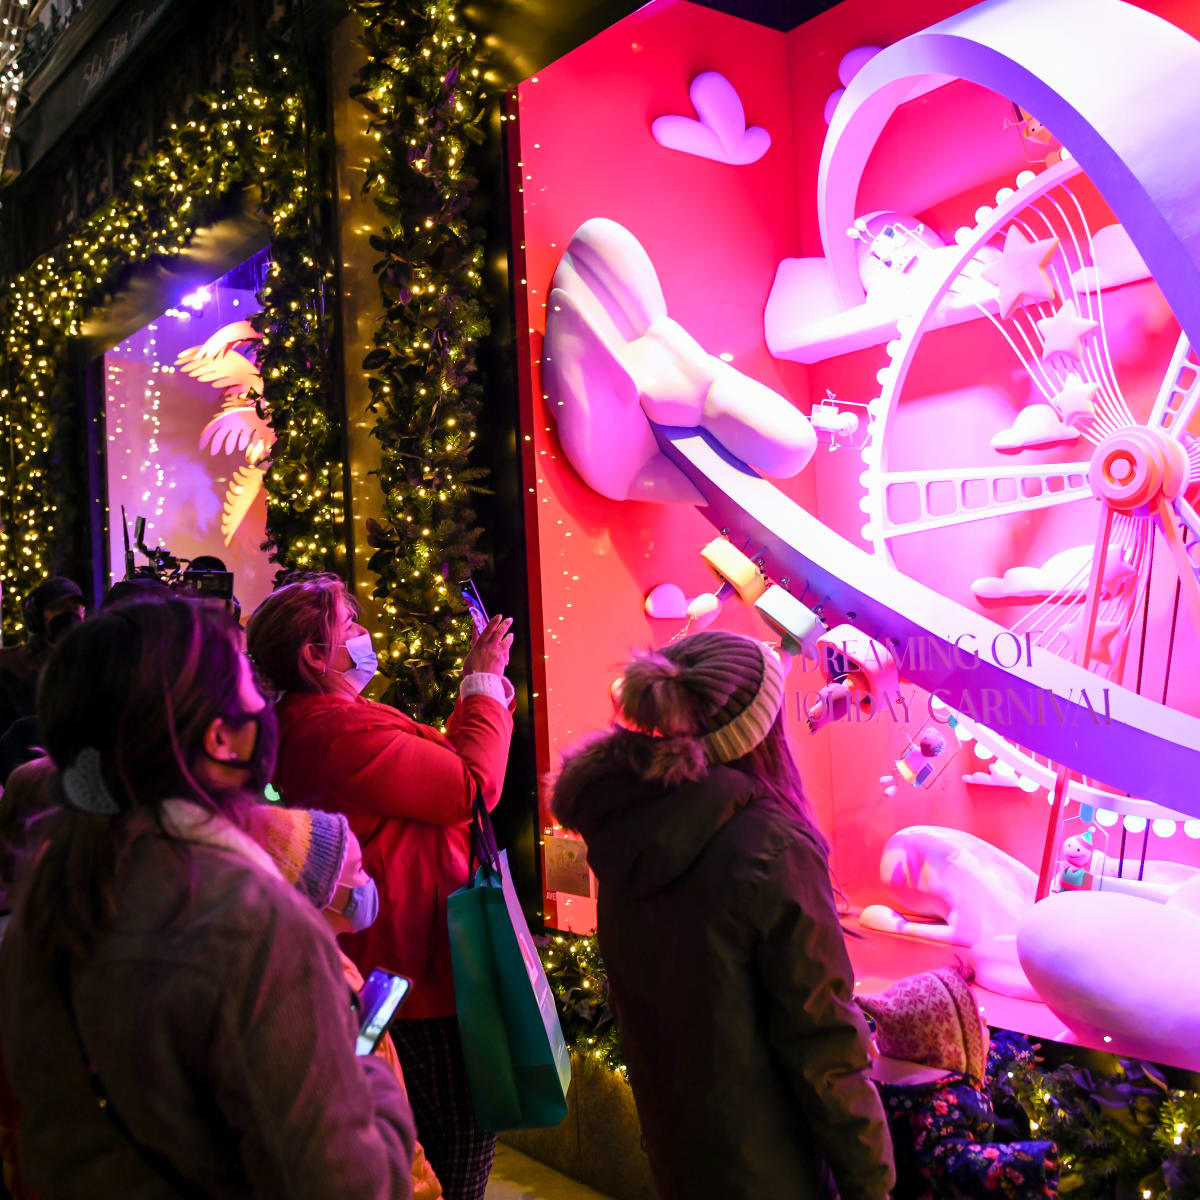 It's The Most Wonderful Time Of The Year: Bergdorf Goodman's Holiday  Windows Are Here - Daily Front Row